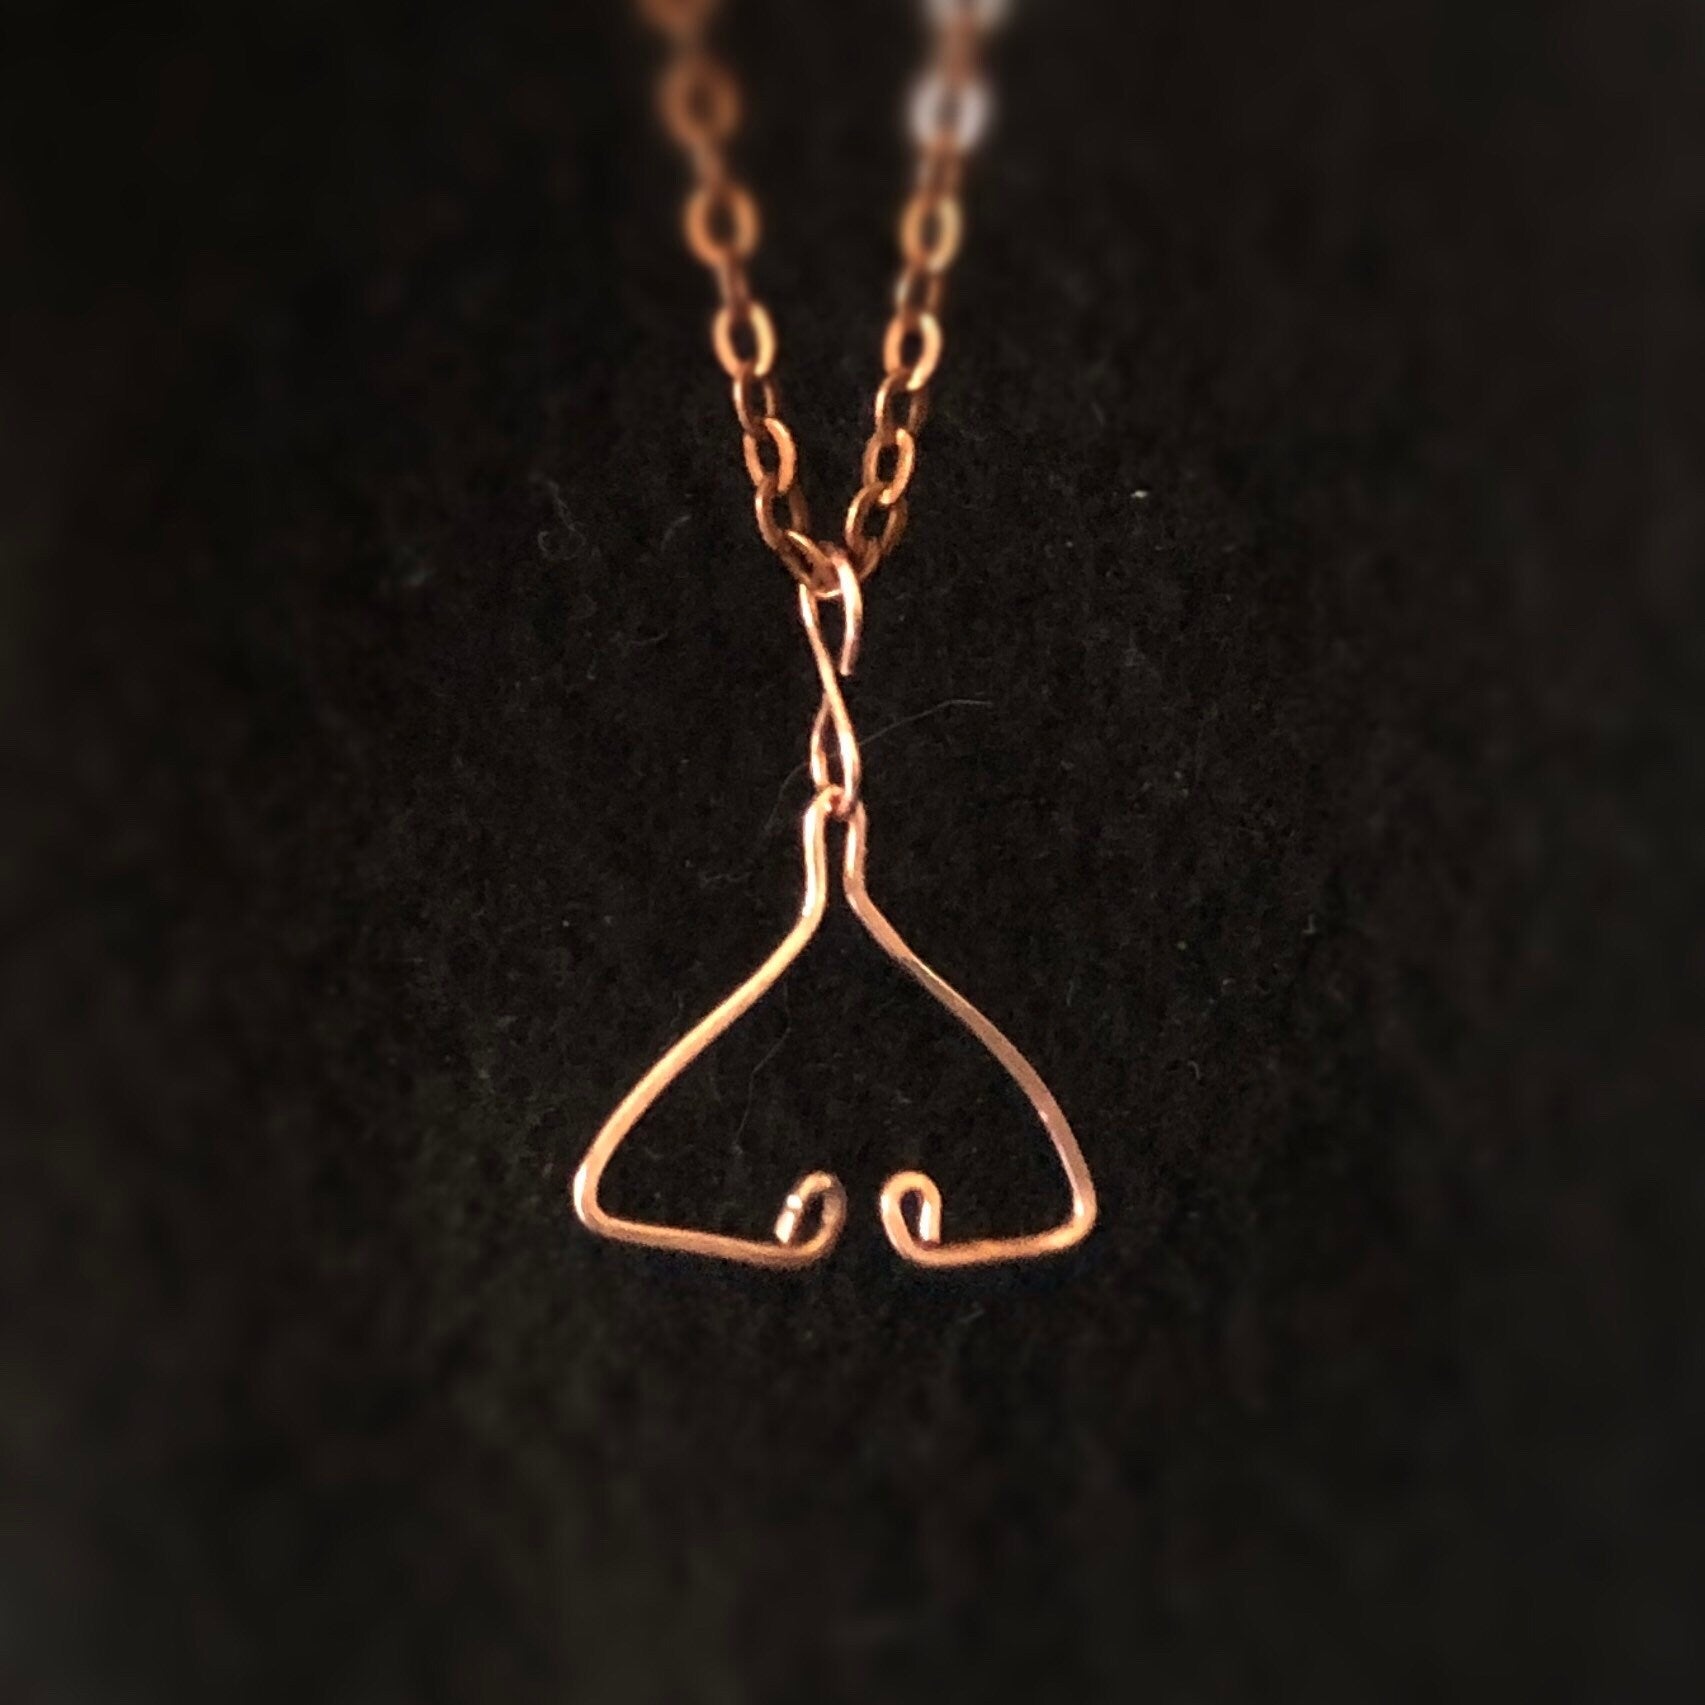 Nautical Orca whale tail, Rose gold fish pendant ring holder necklace, Killer whales fish necklace, Native American protection amulet